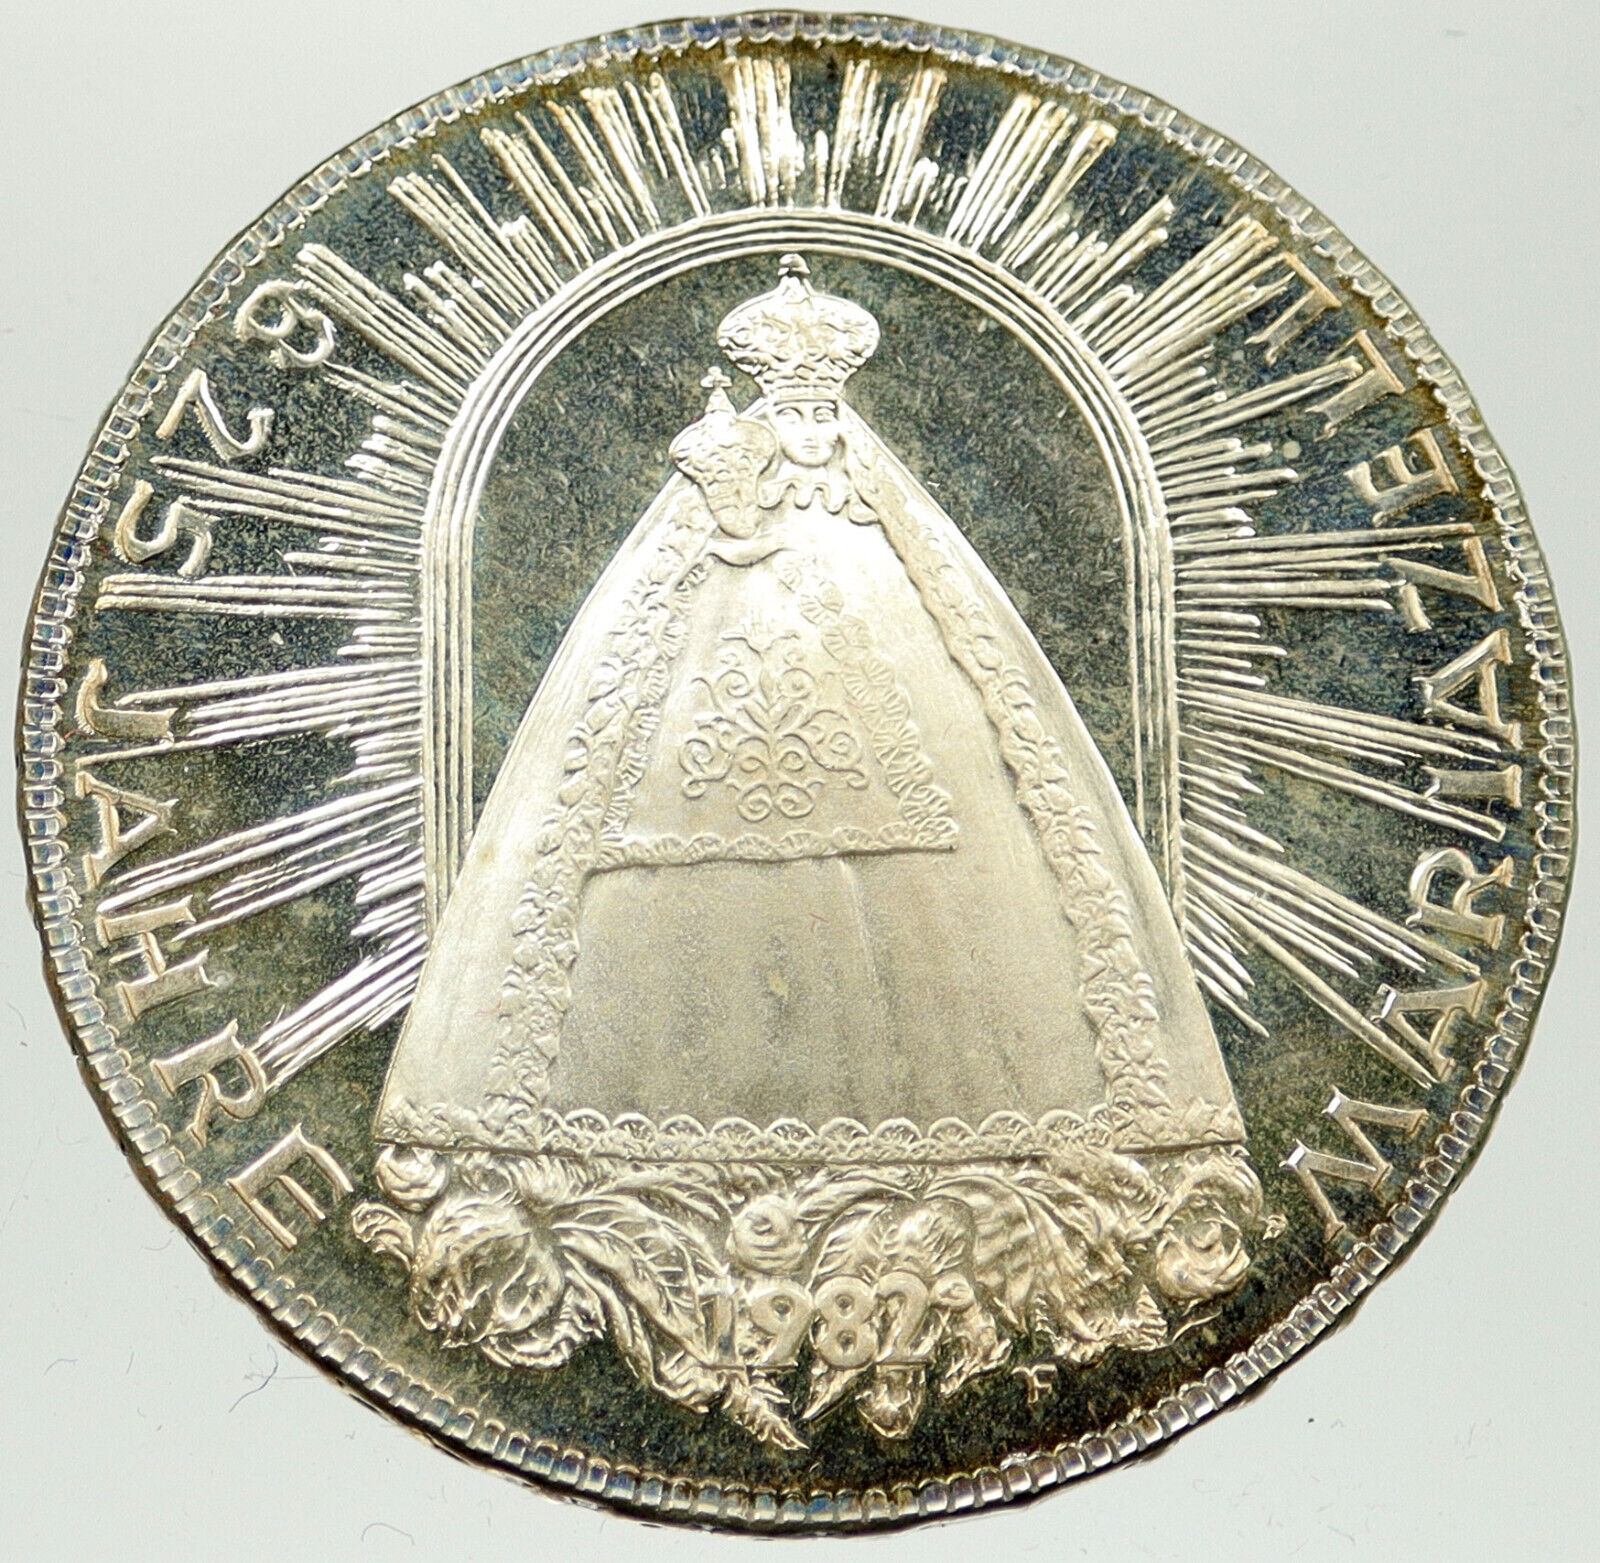 1982 AUSTRIA Proof Silver 500 Schilling MARY JESUS Mariazell Shrine Coin i120272